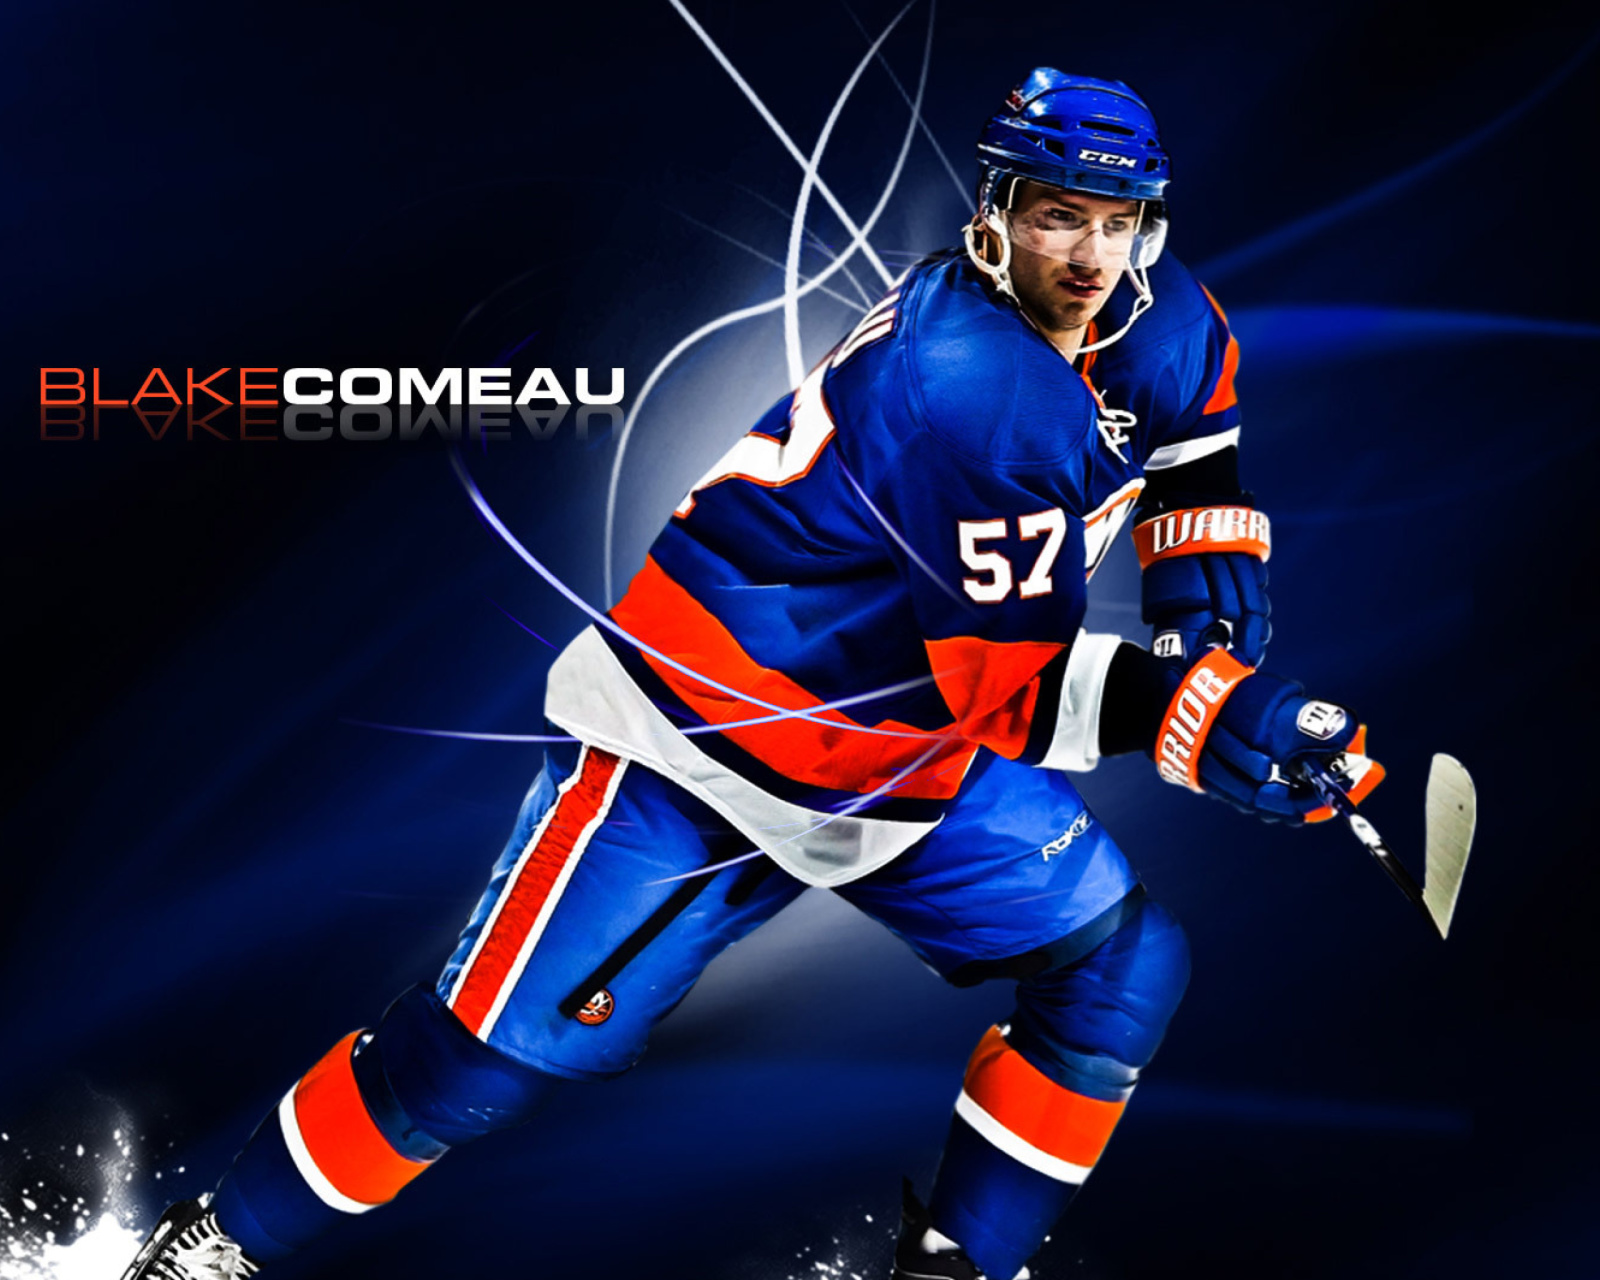 Blake Comeau from HL wallpaper 1600x1280